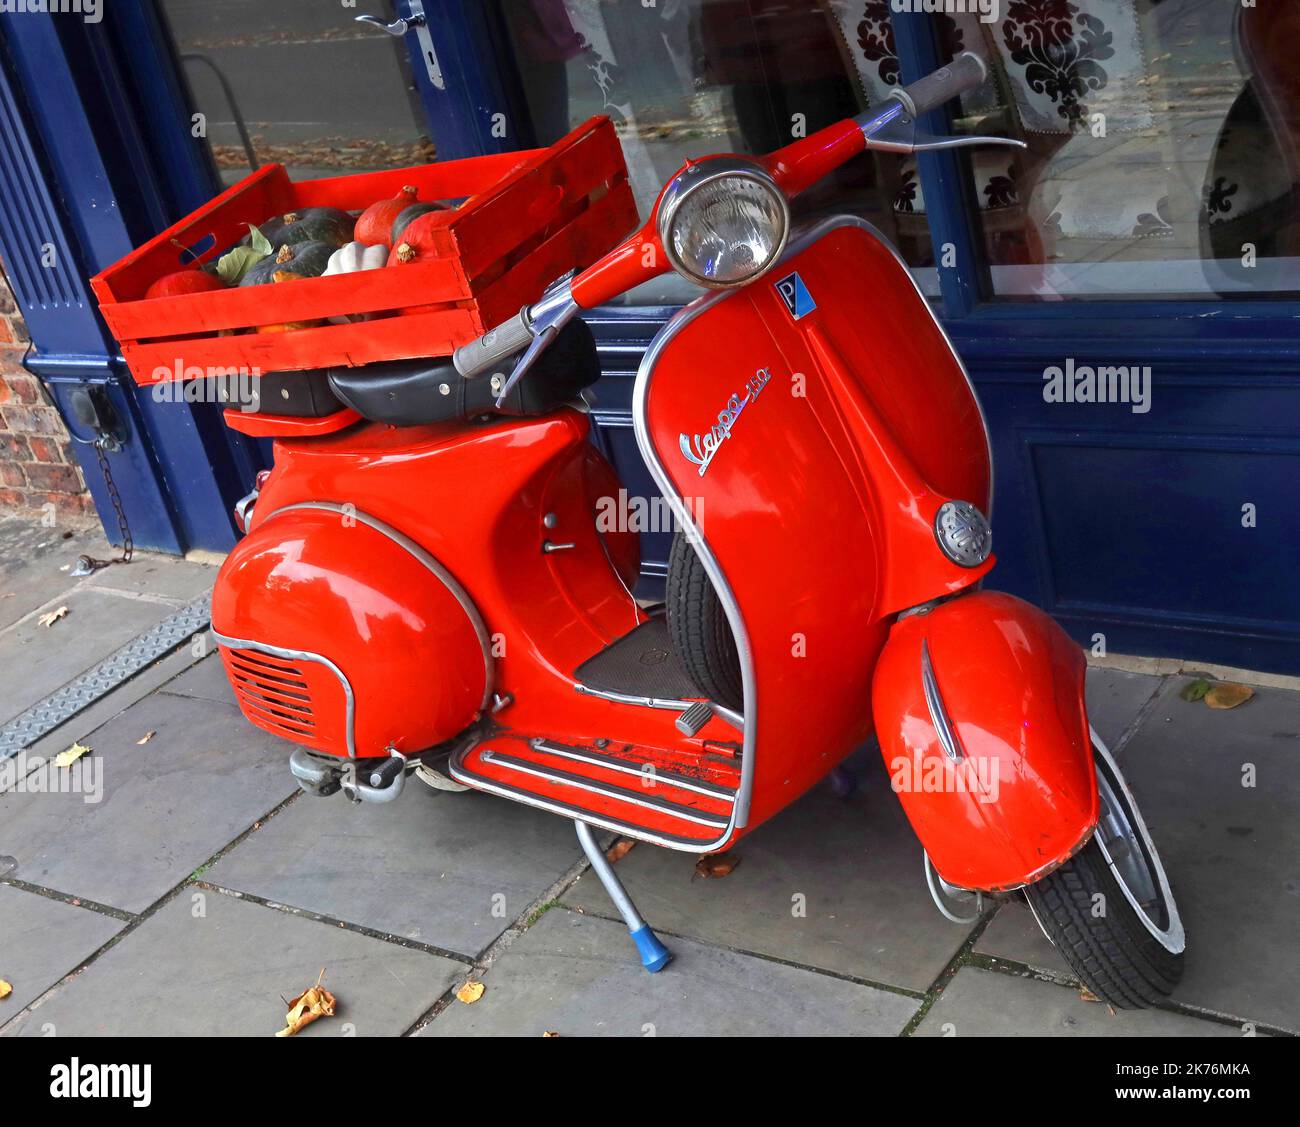 Red Piaggio Vespa 150 delivering vegetables, to a restaurant, Italy Stock Photo